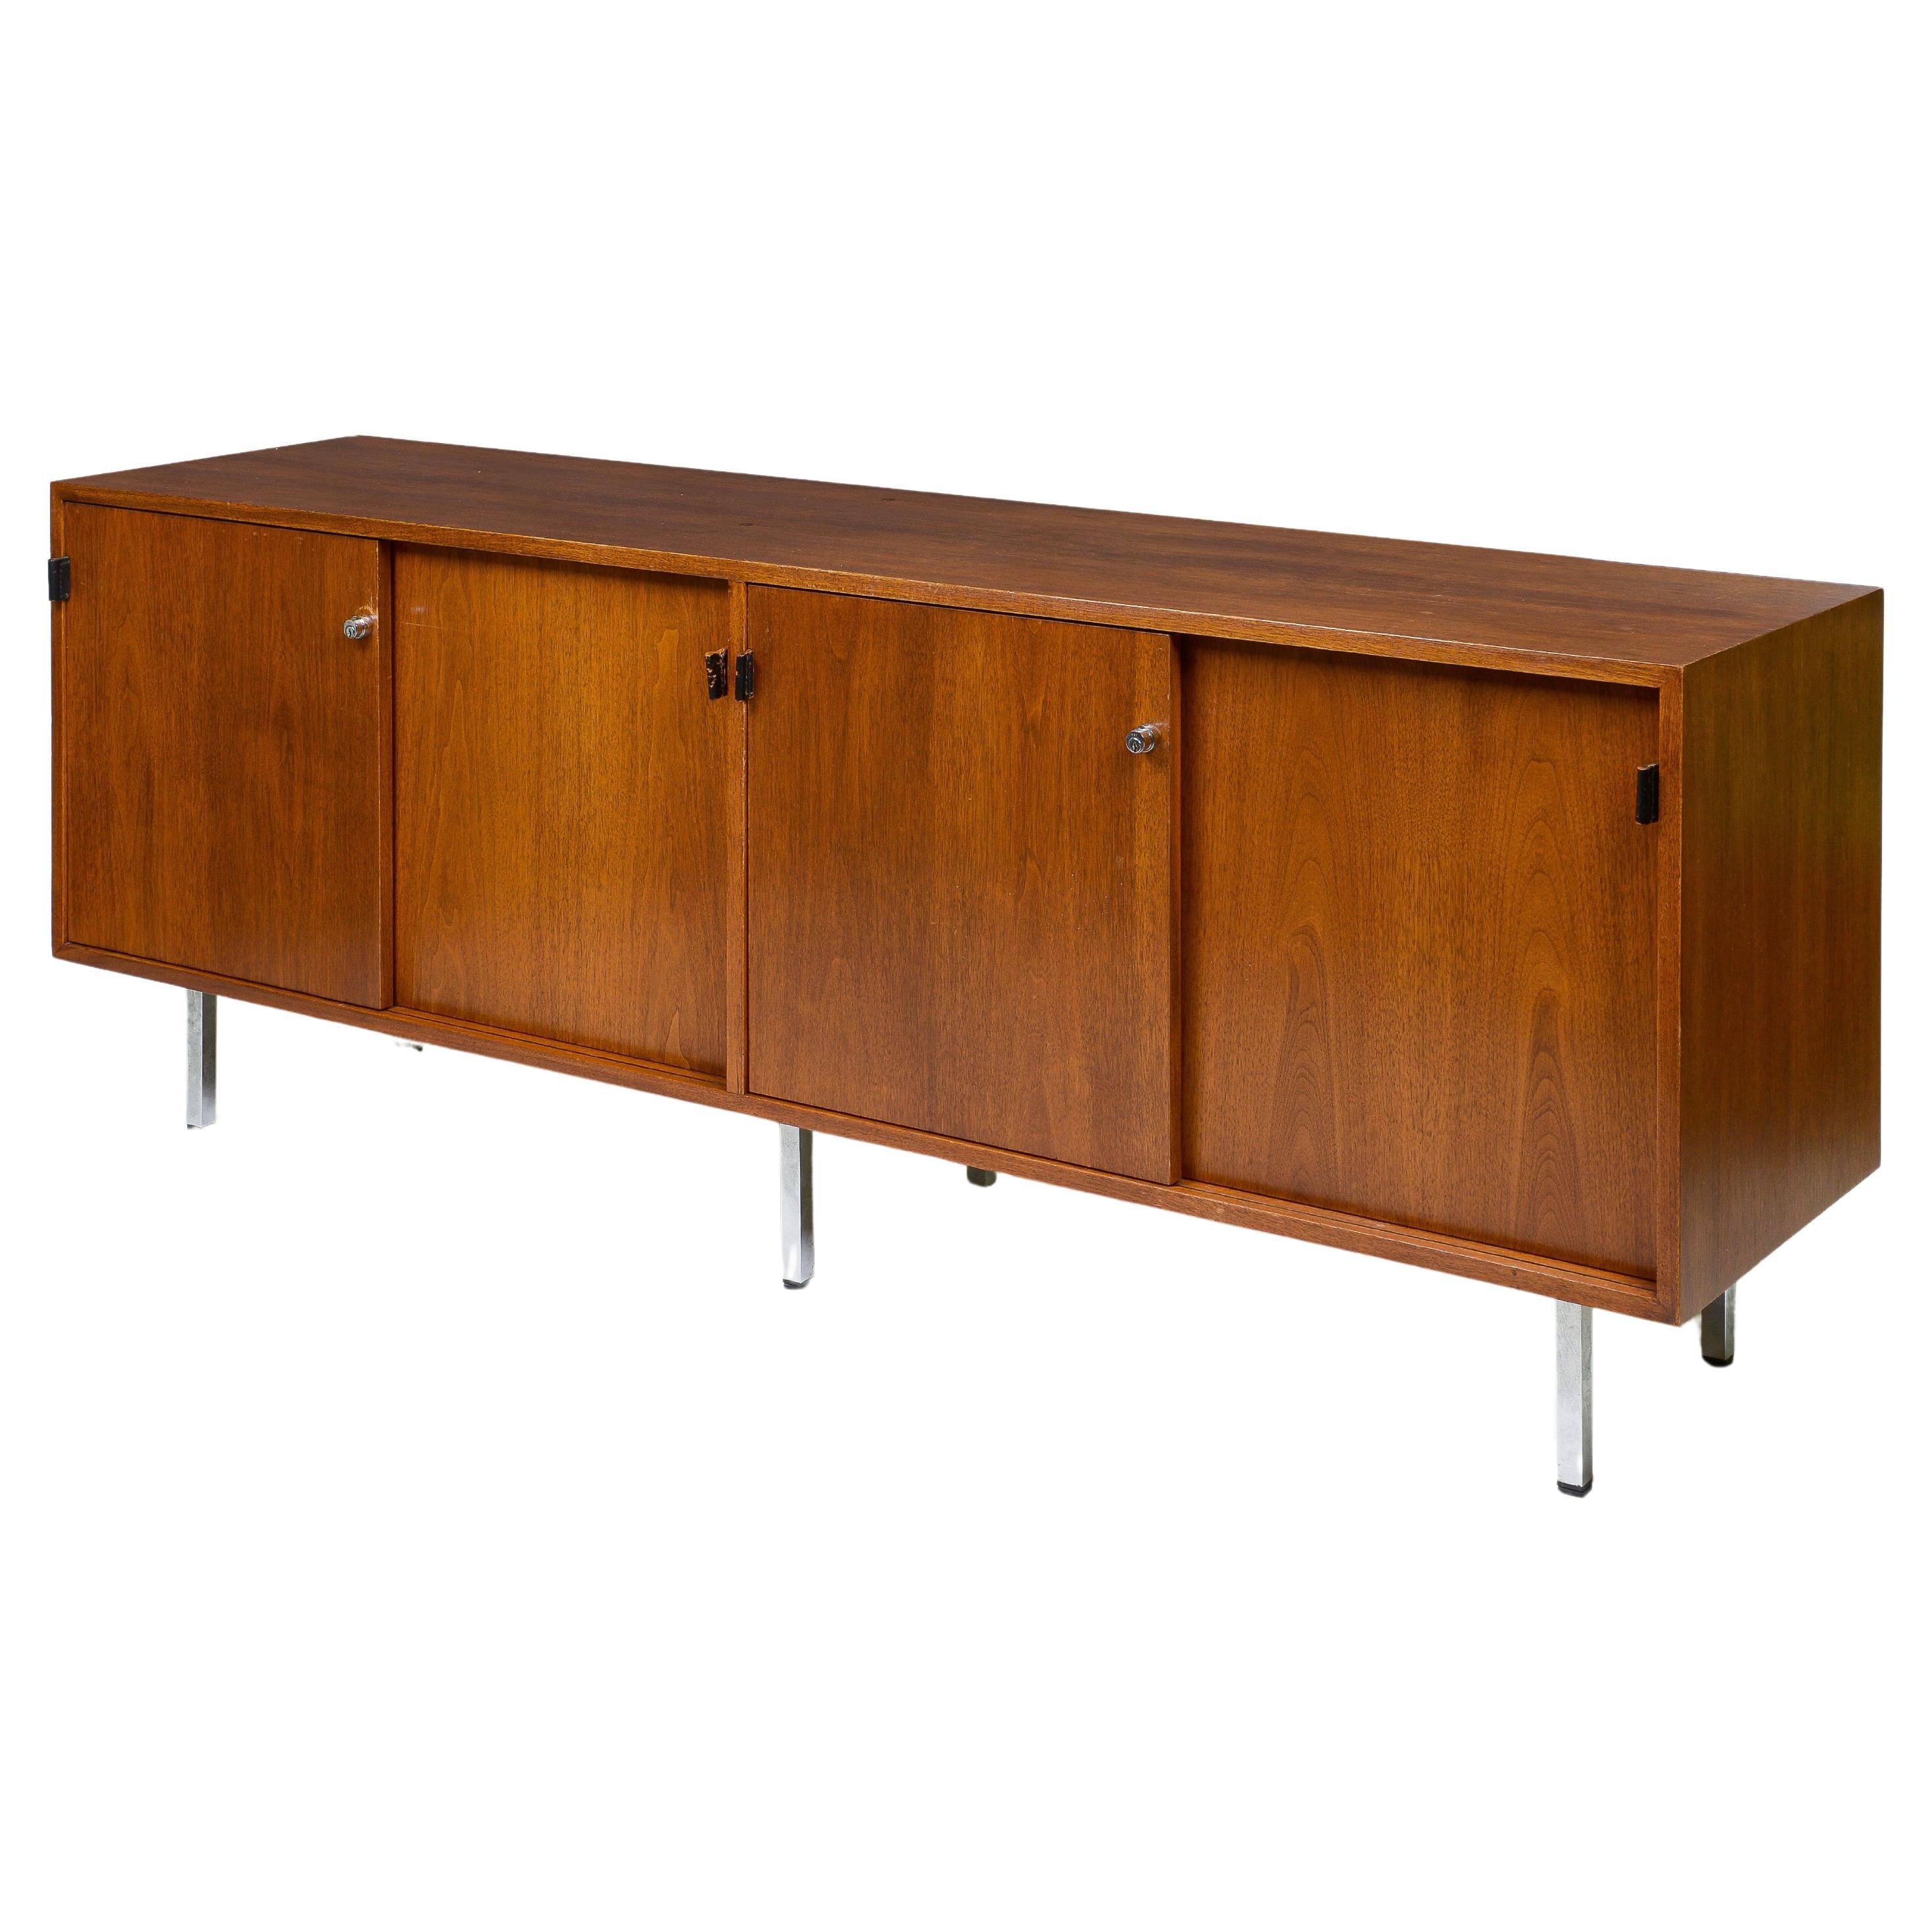 A Mid-Century Knoll Walnut Credenza For Sale